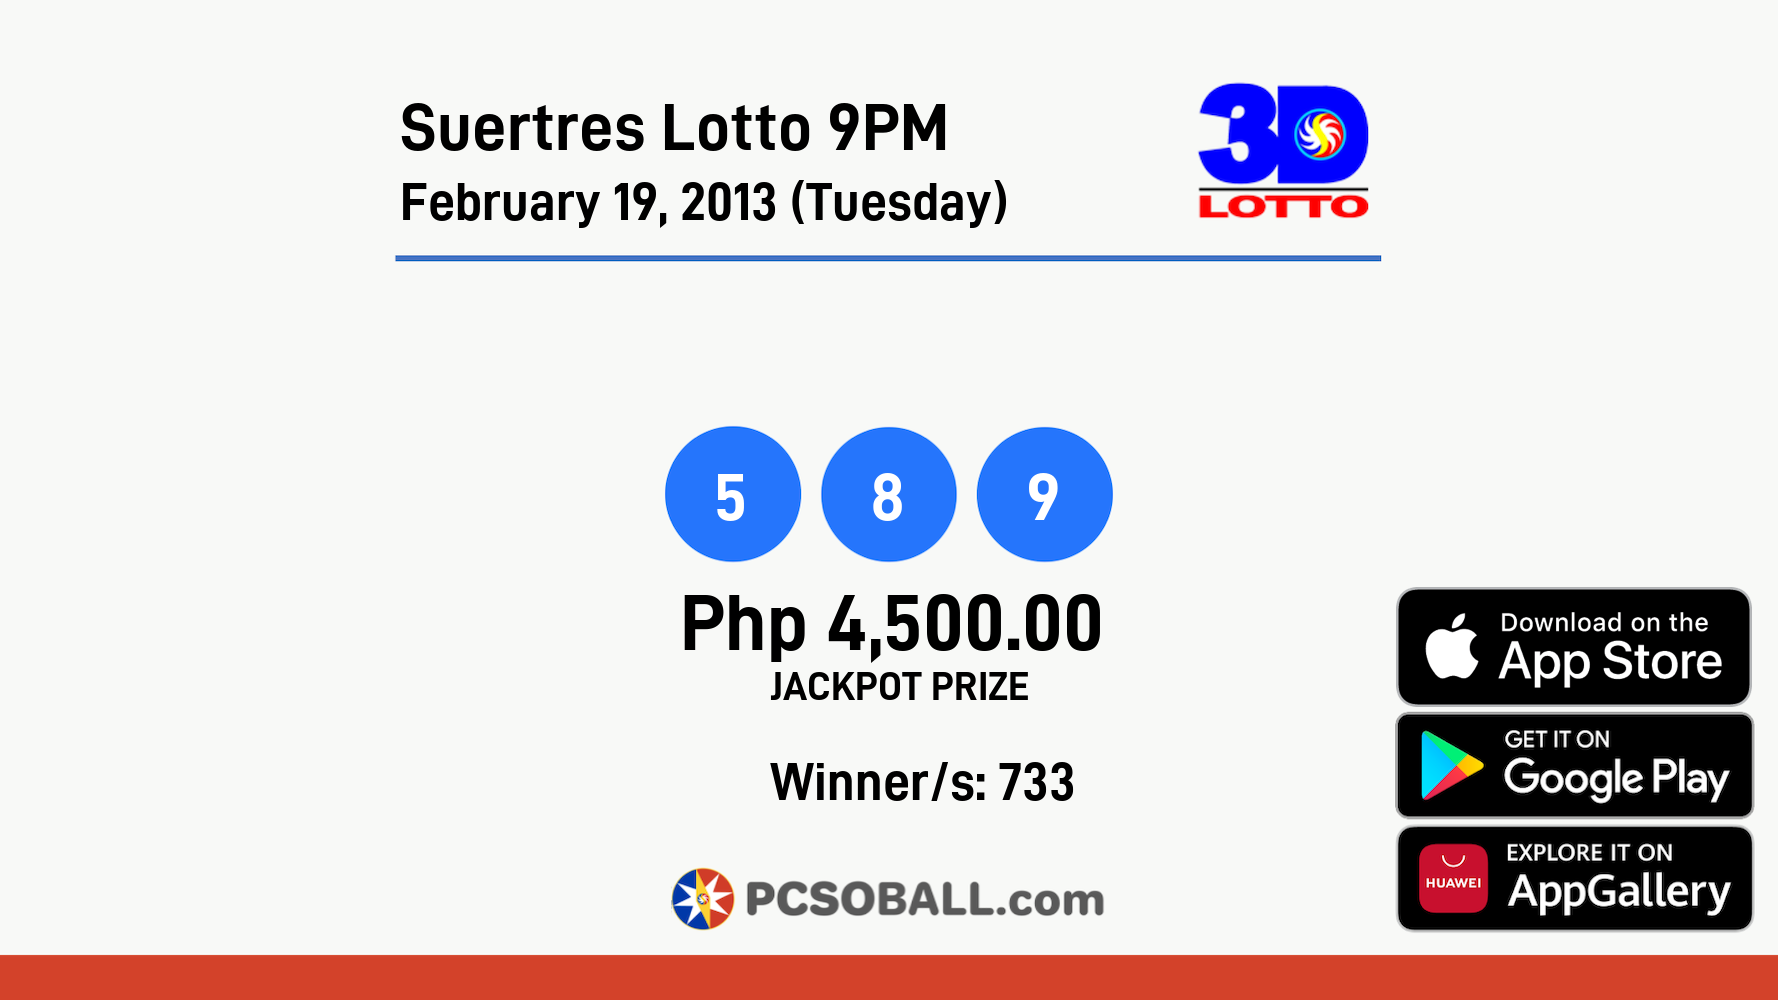 Suertres Lotto 9PM February 19, 2013 (Tuesday) Result